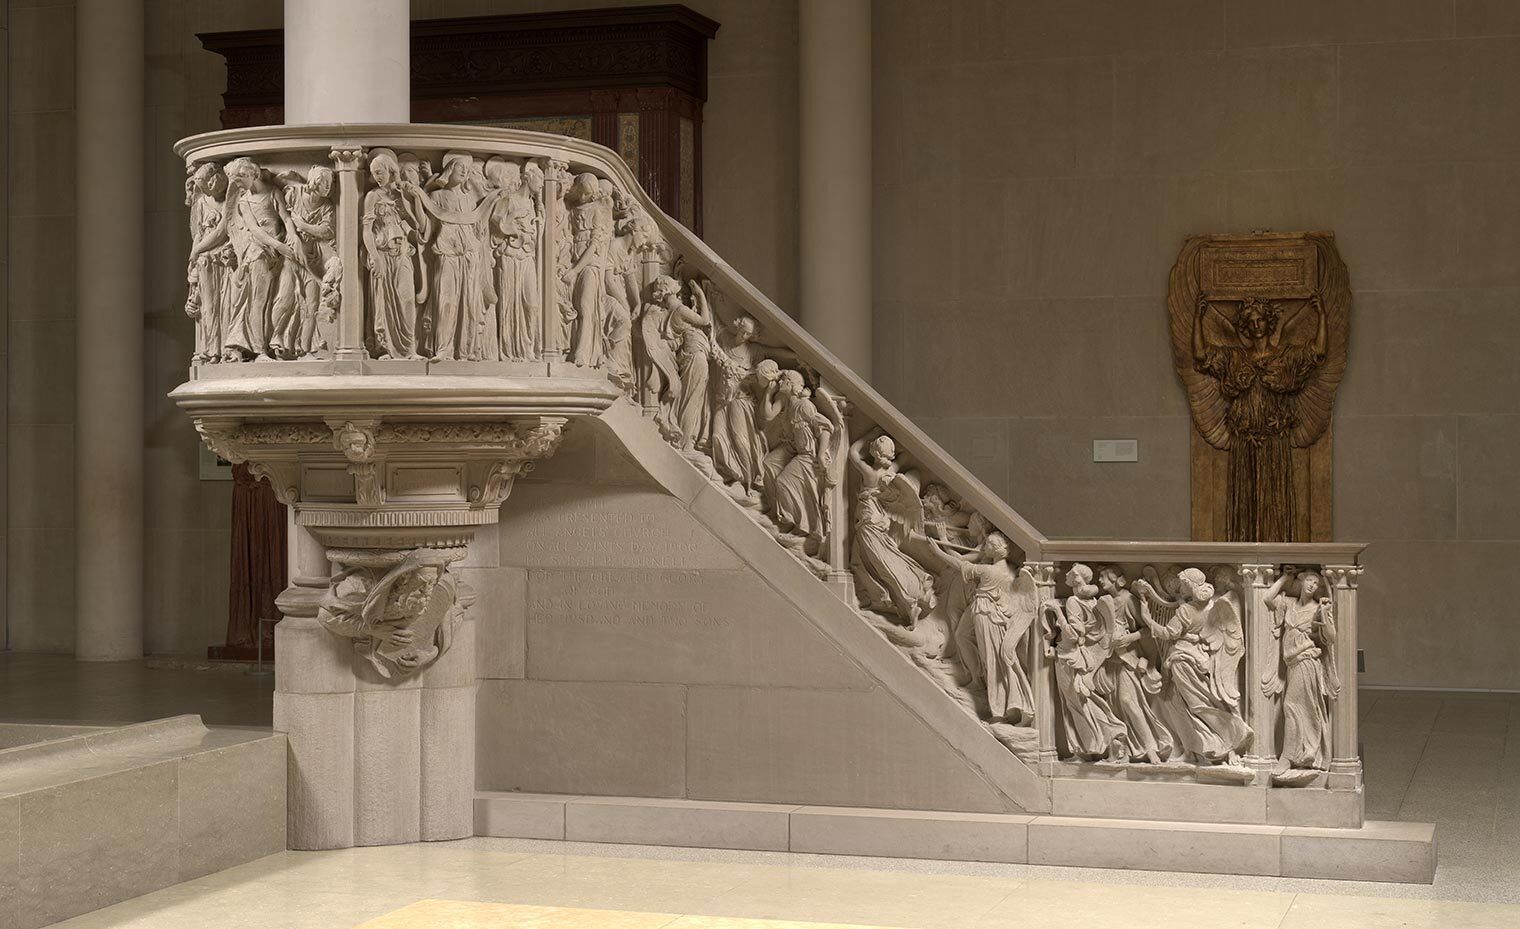 An ornate pulpit is installed in The Met's galleries